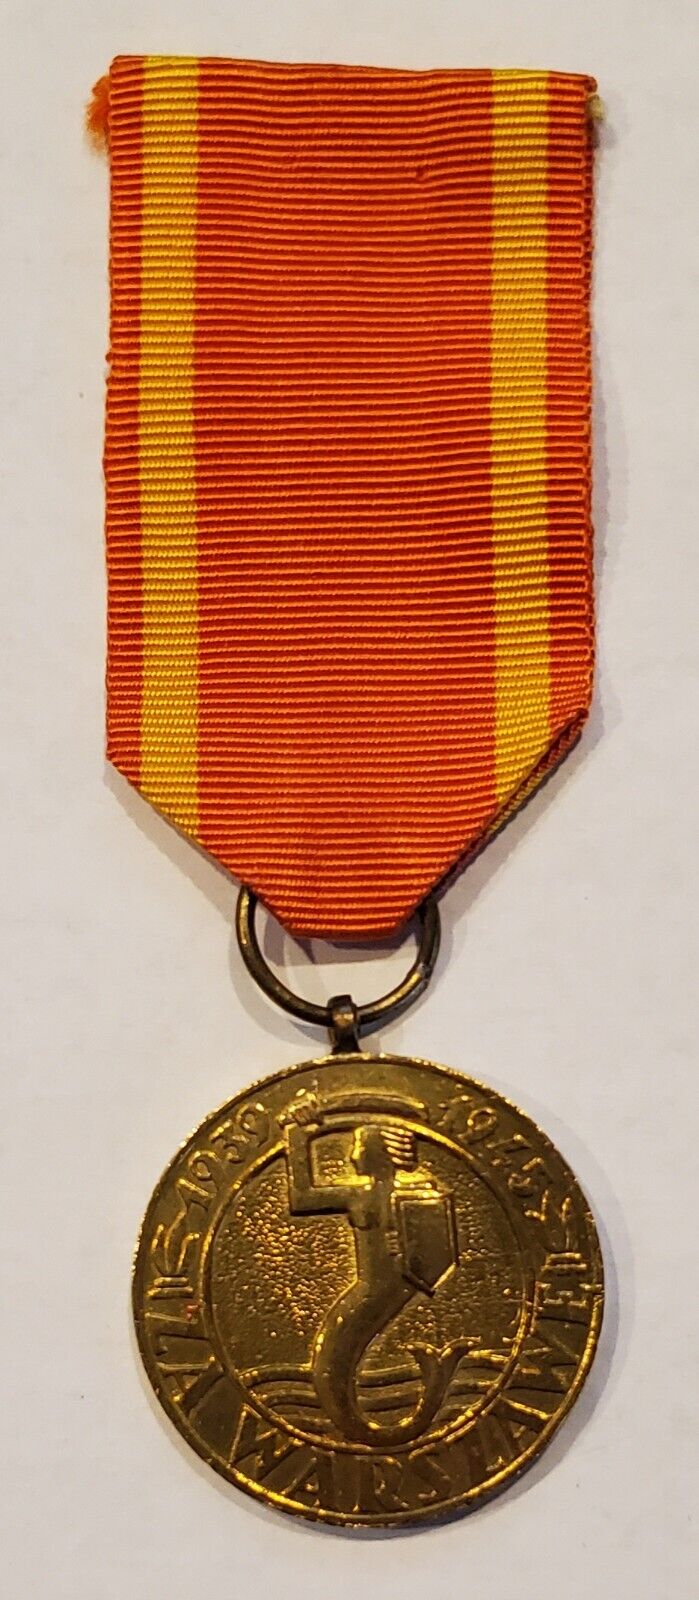 WWII 1945 Poland Polish Medal for Victory & Freedom RP Awarded Against Germany